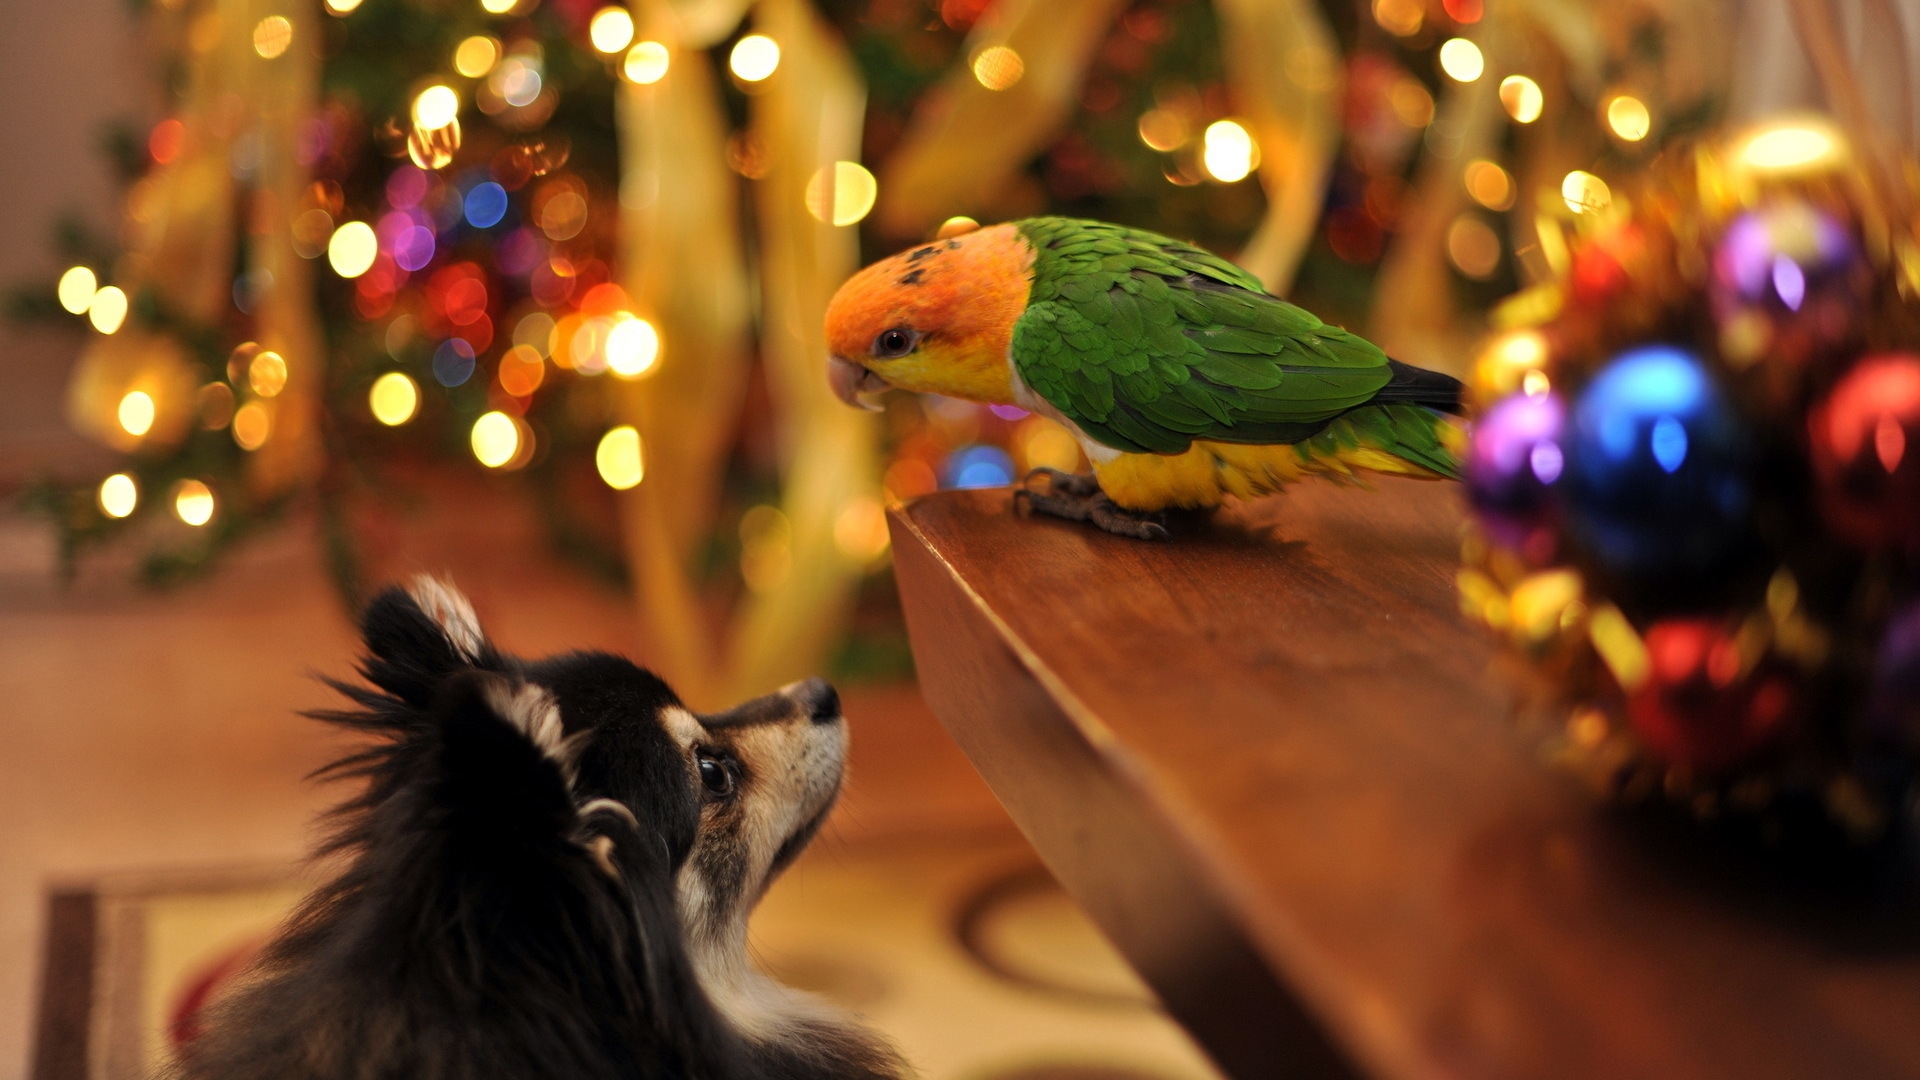 Parrot and Dog Talking for 1920 x 1080 HDTV 1080p resolution